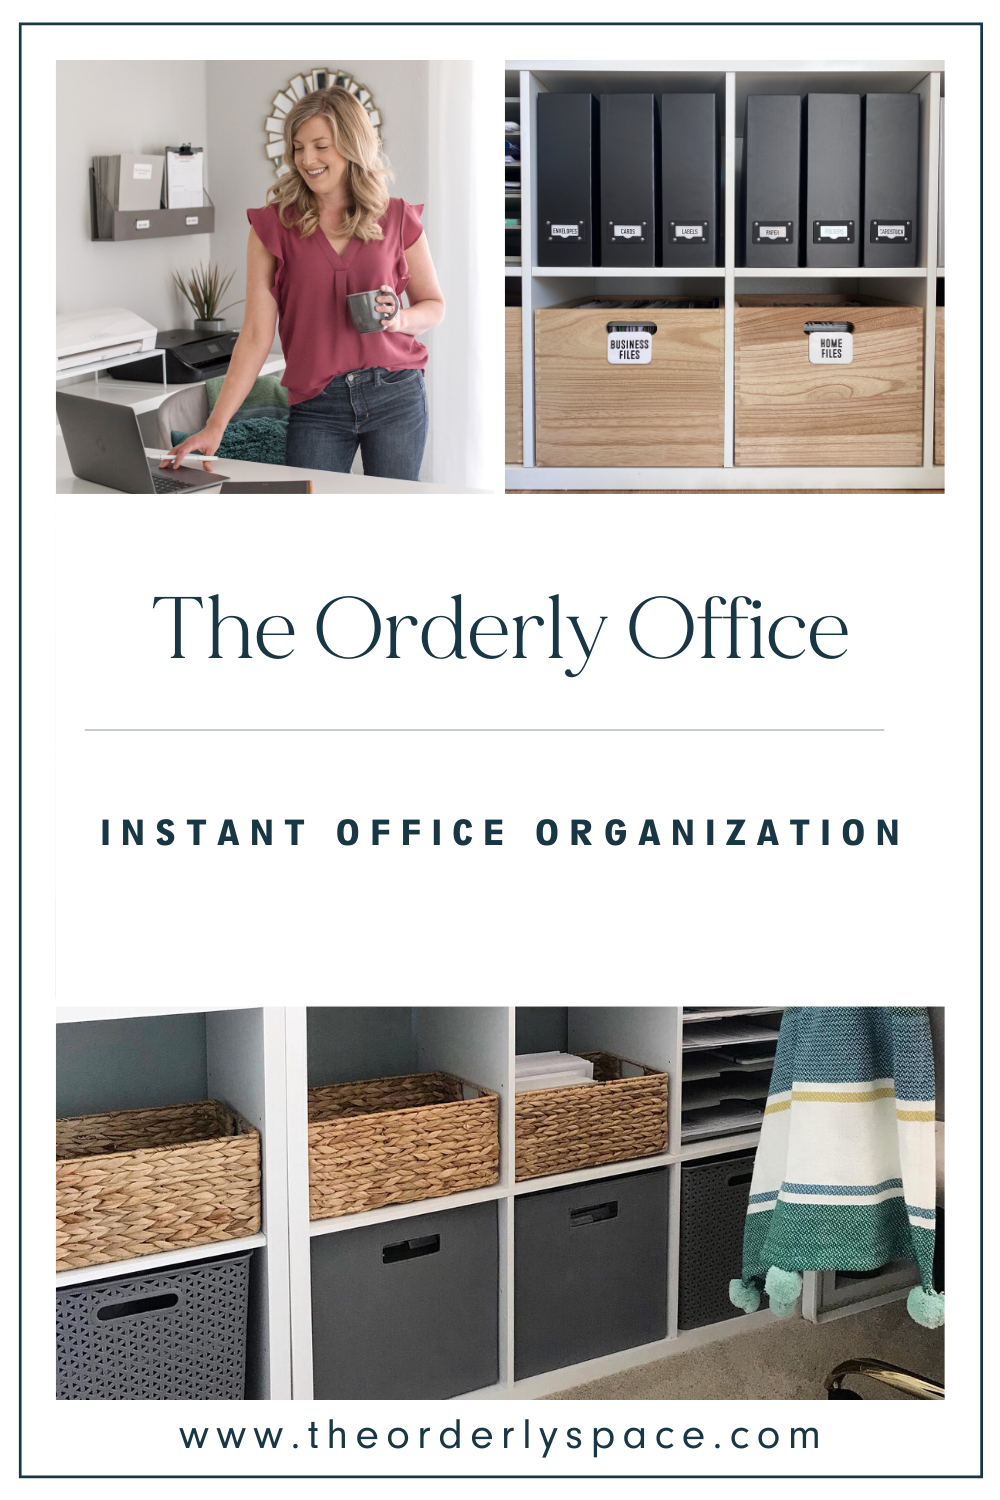 Organizing the Home and Office Space - CHADD